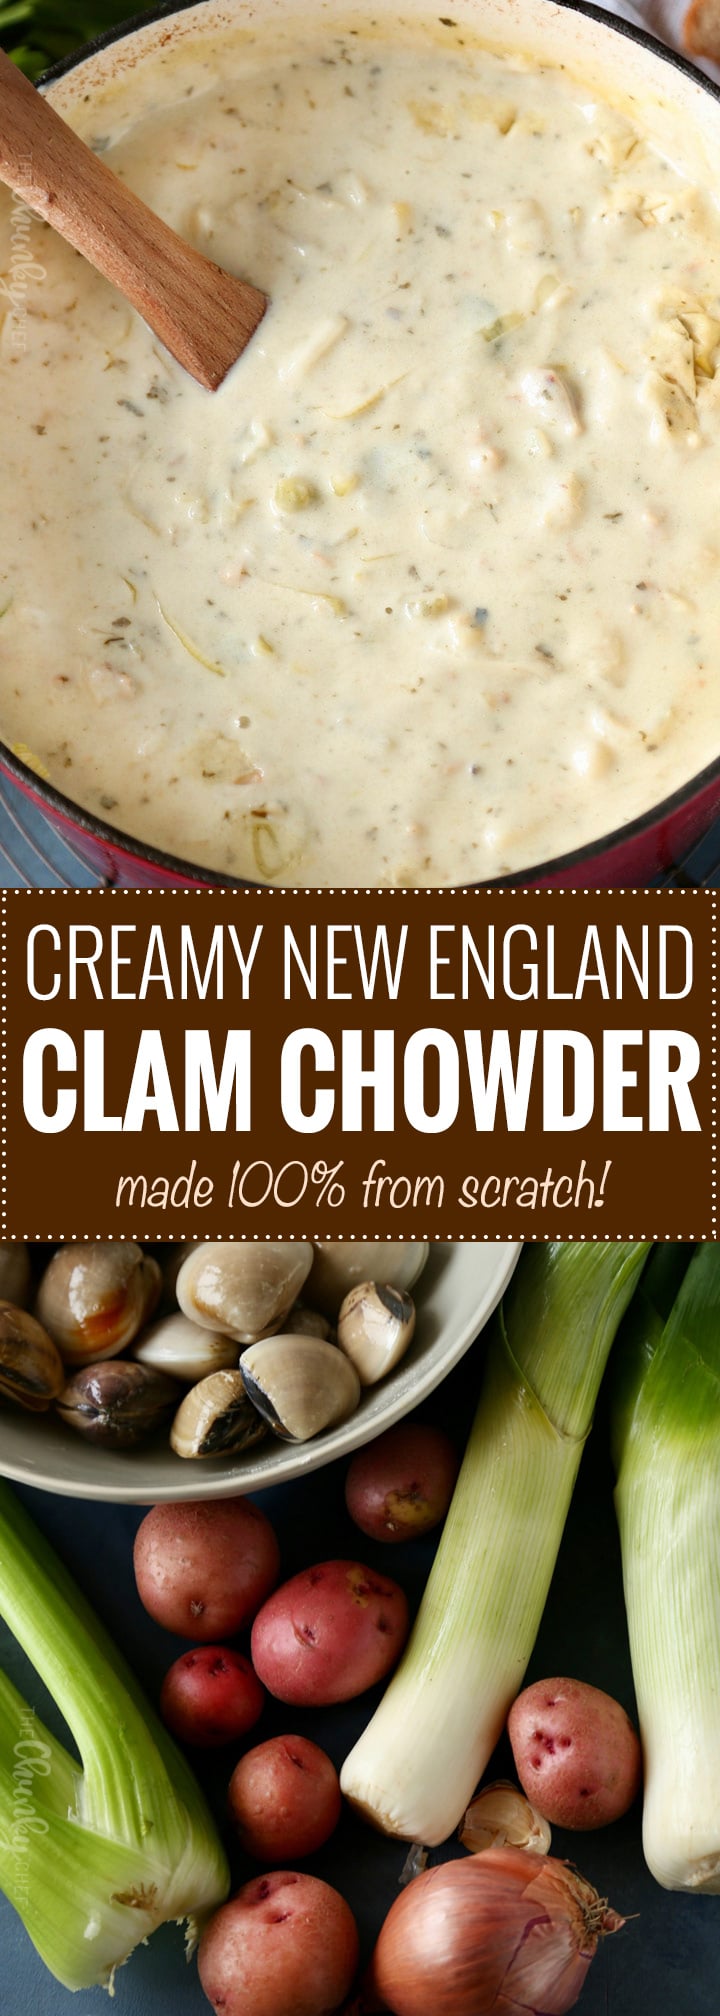 Creamy New England Clam Chowder | The perfect comfort food on a cold night, this creamy clam chowder is easy to make, uses fresh clams, and makes enough to feed a huge family! | https://thechunkychef.com | #clamchowder #clamchowderrecipe #newenglandclamchowder #souprecipe #soup #chowder